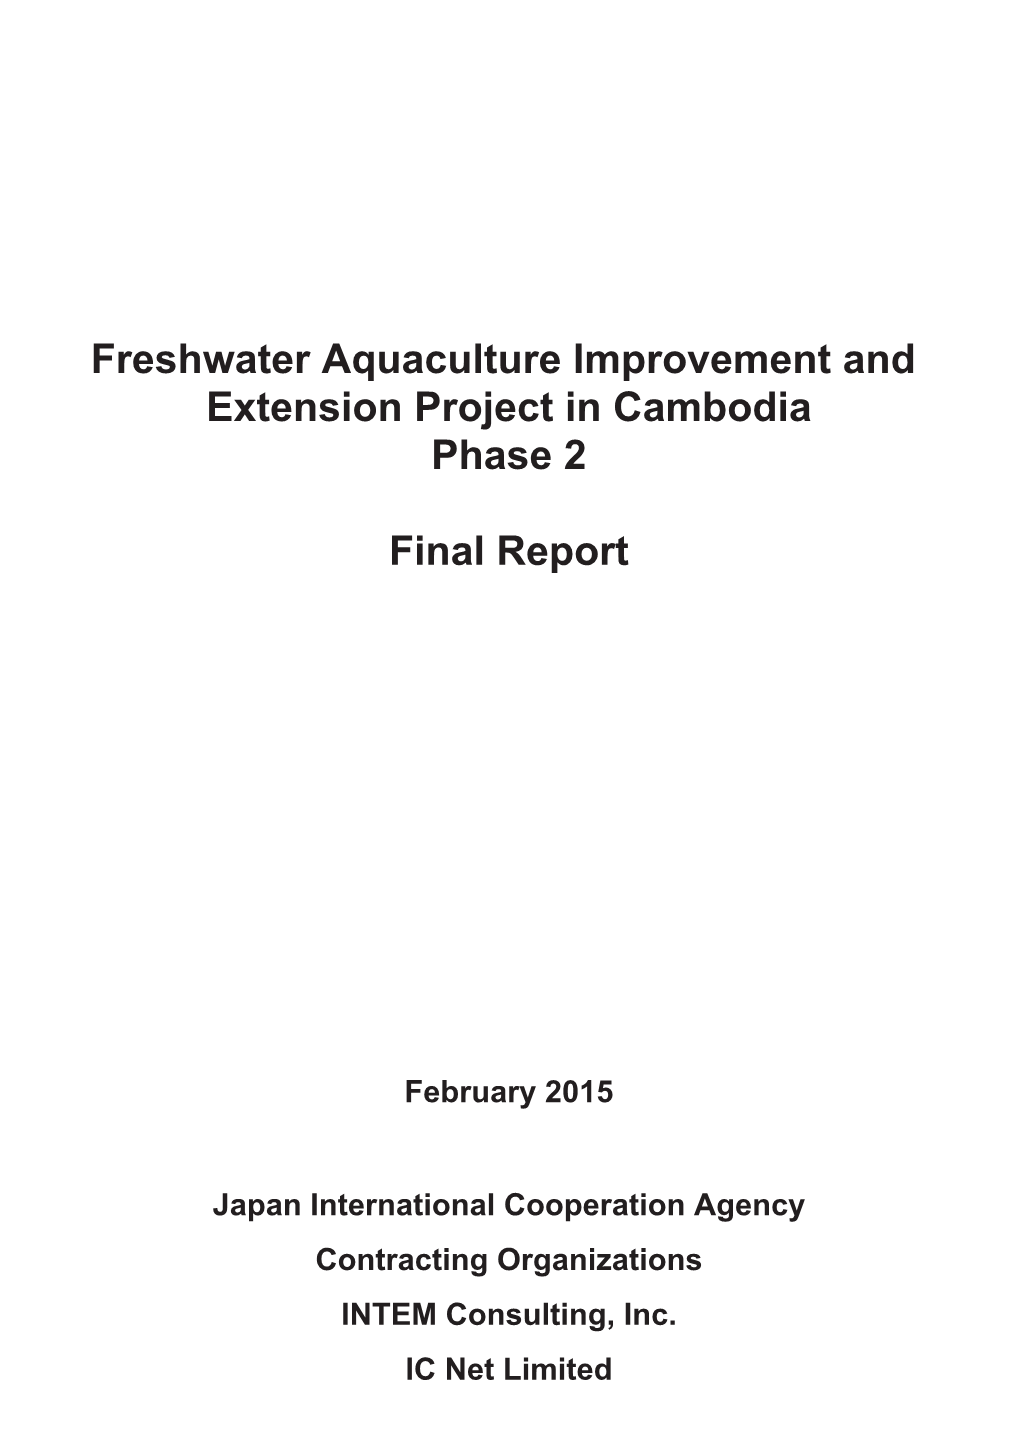 Freshwater Aquaculture Improvement and Extension Project in Cambodia Phase 2